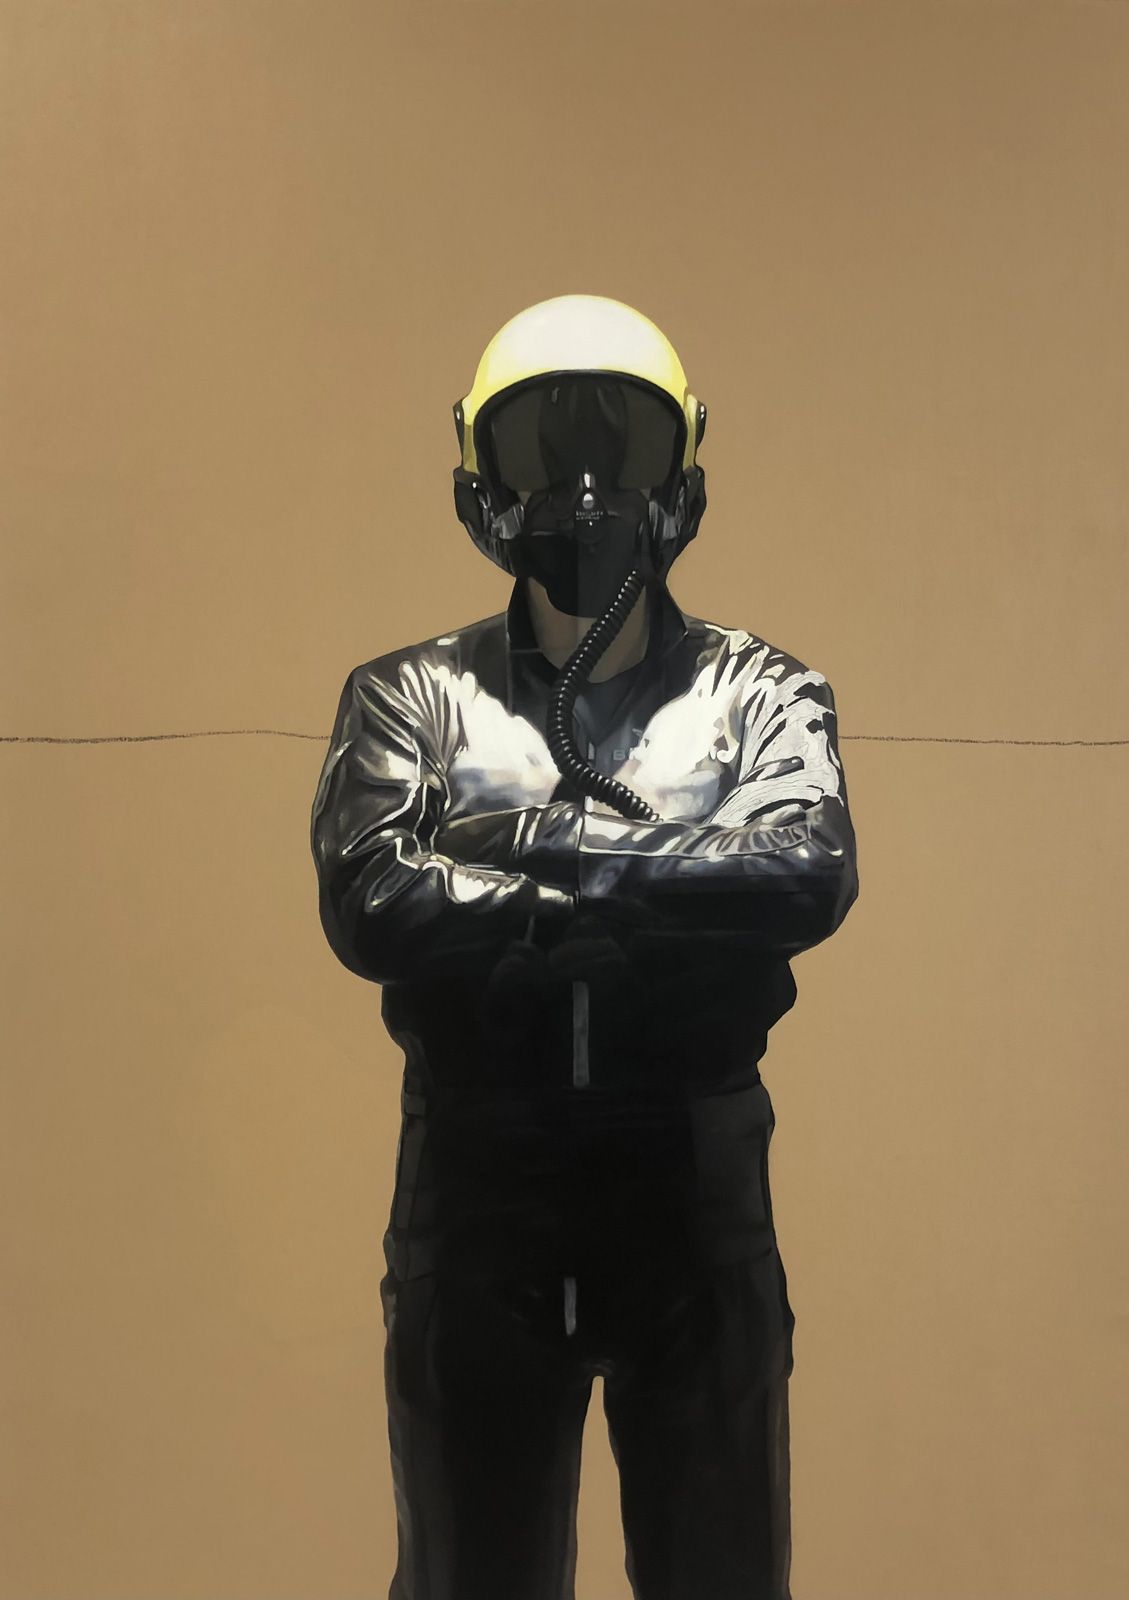 Mark Alexander's oil painting depicts a figure in a reflective suit and helmet against a tan backdrop.